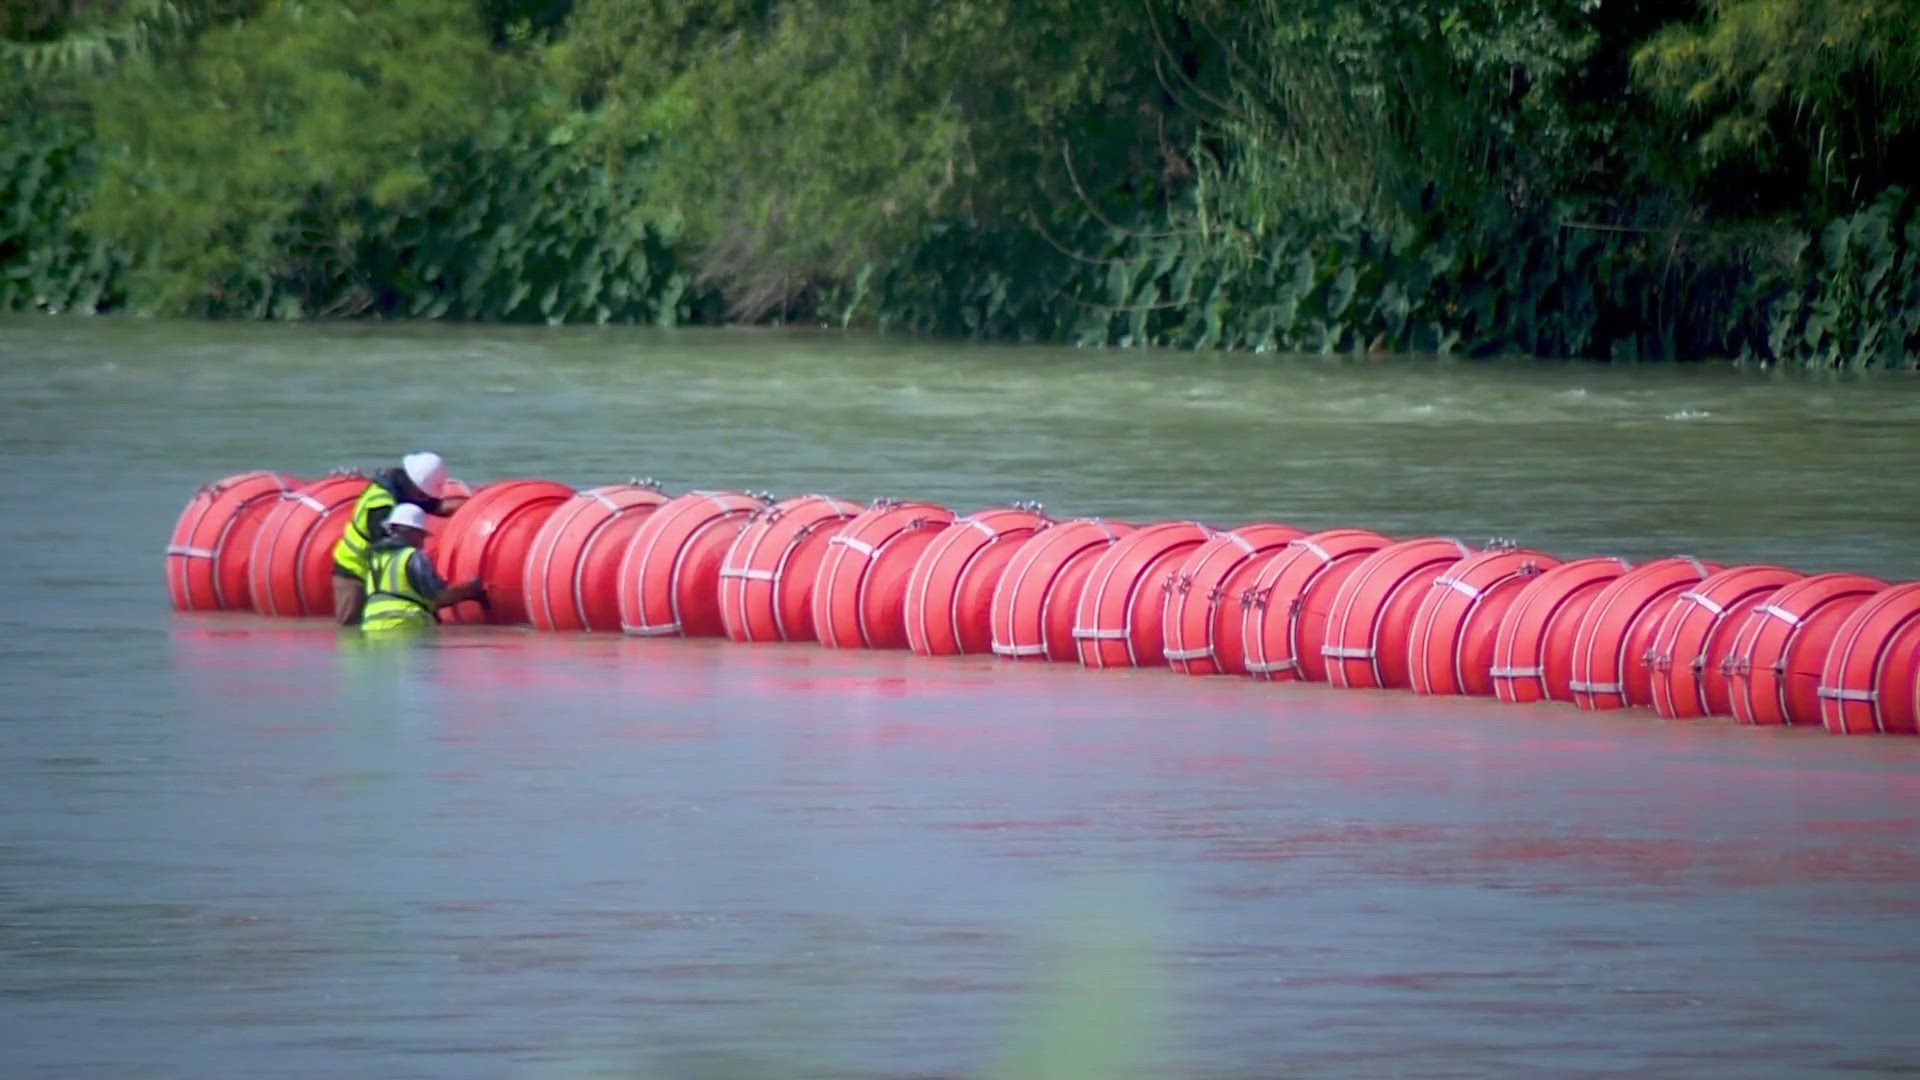 The Texas Department of Public Safety said the stretch of buoys will go about 1,000 feet downriver in Eagle Pass.